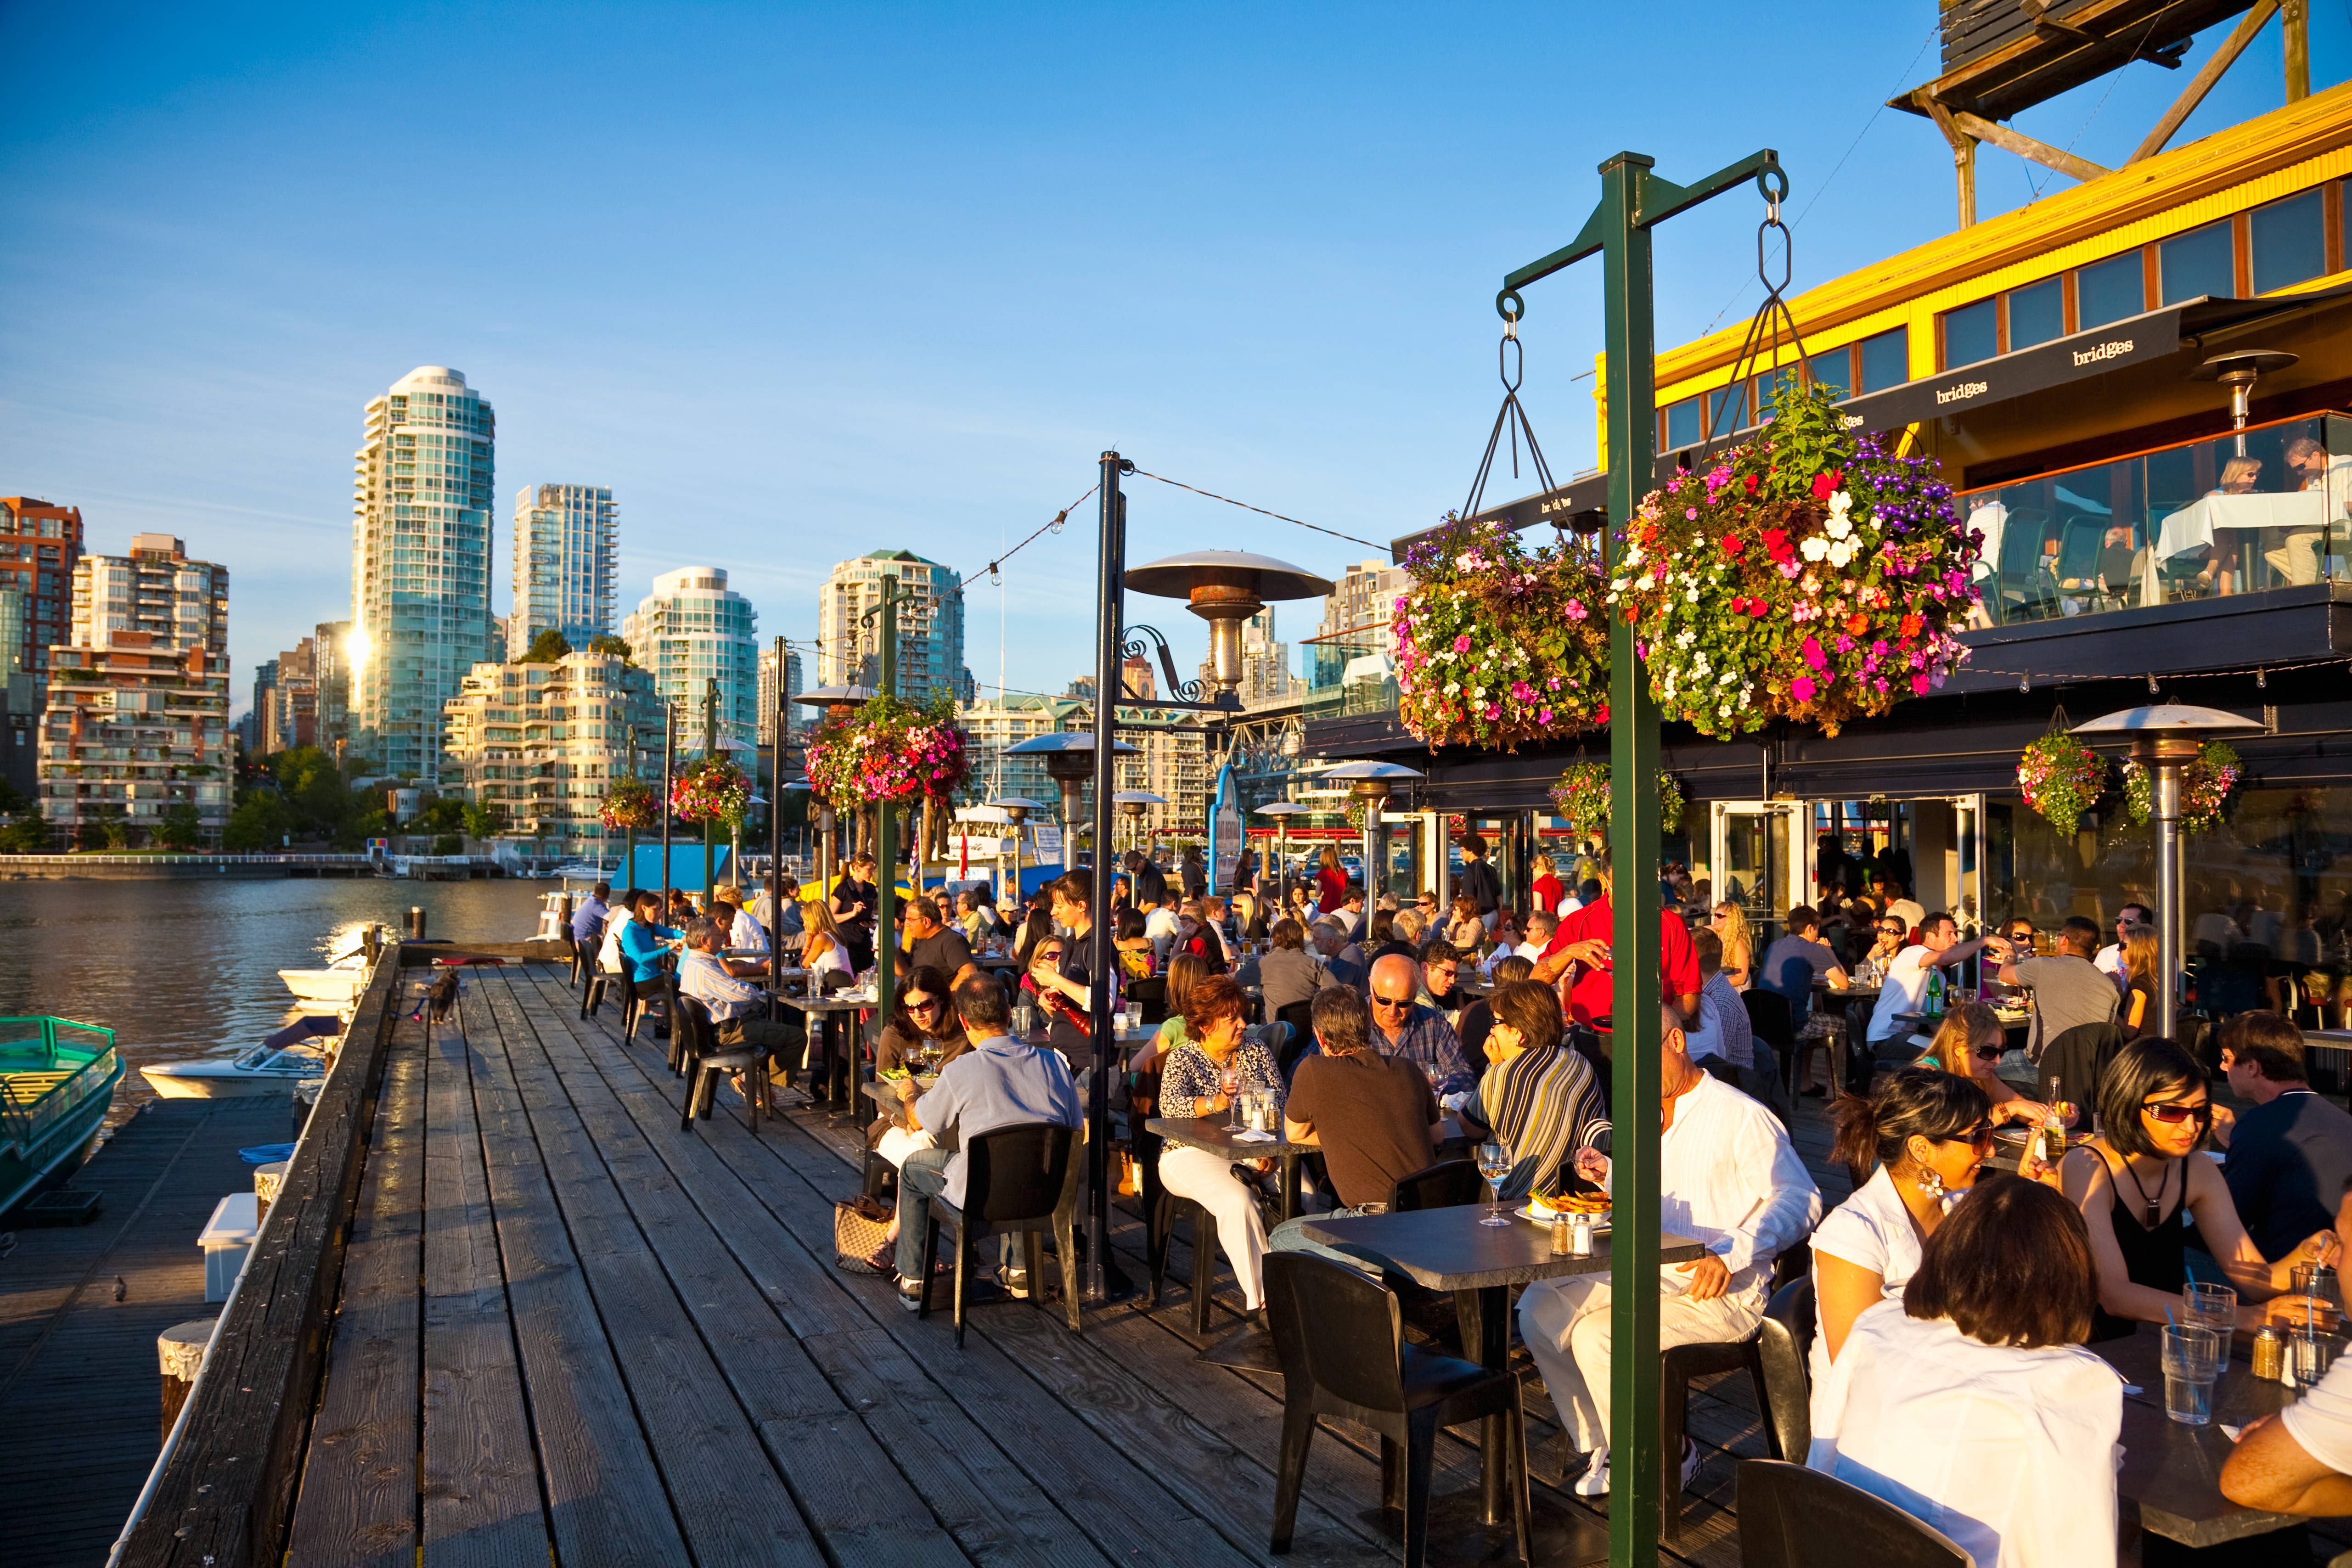 Alfresco dining on Granville Island, with Vancouver in the background. Image by Stuart Dee / The Image Bank / Getty